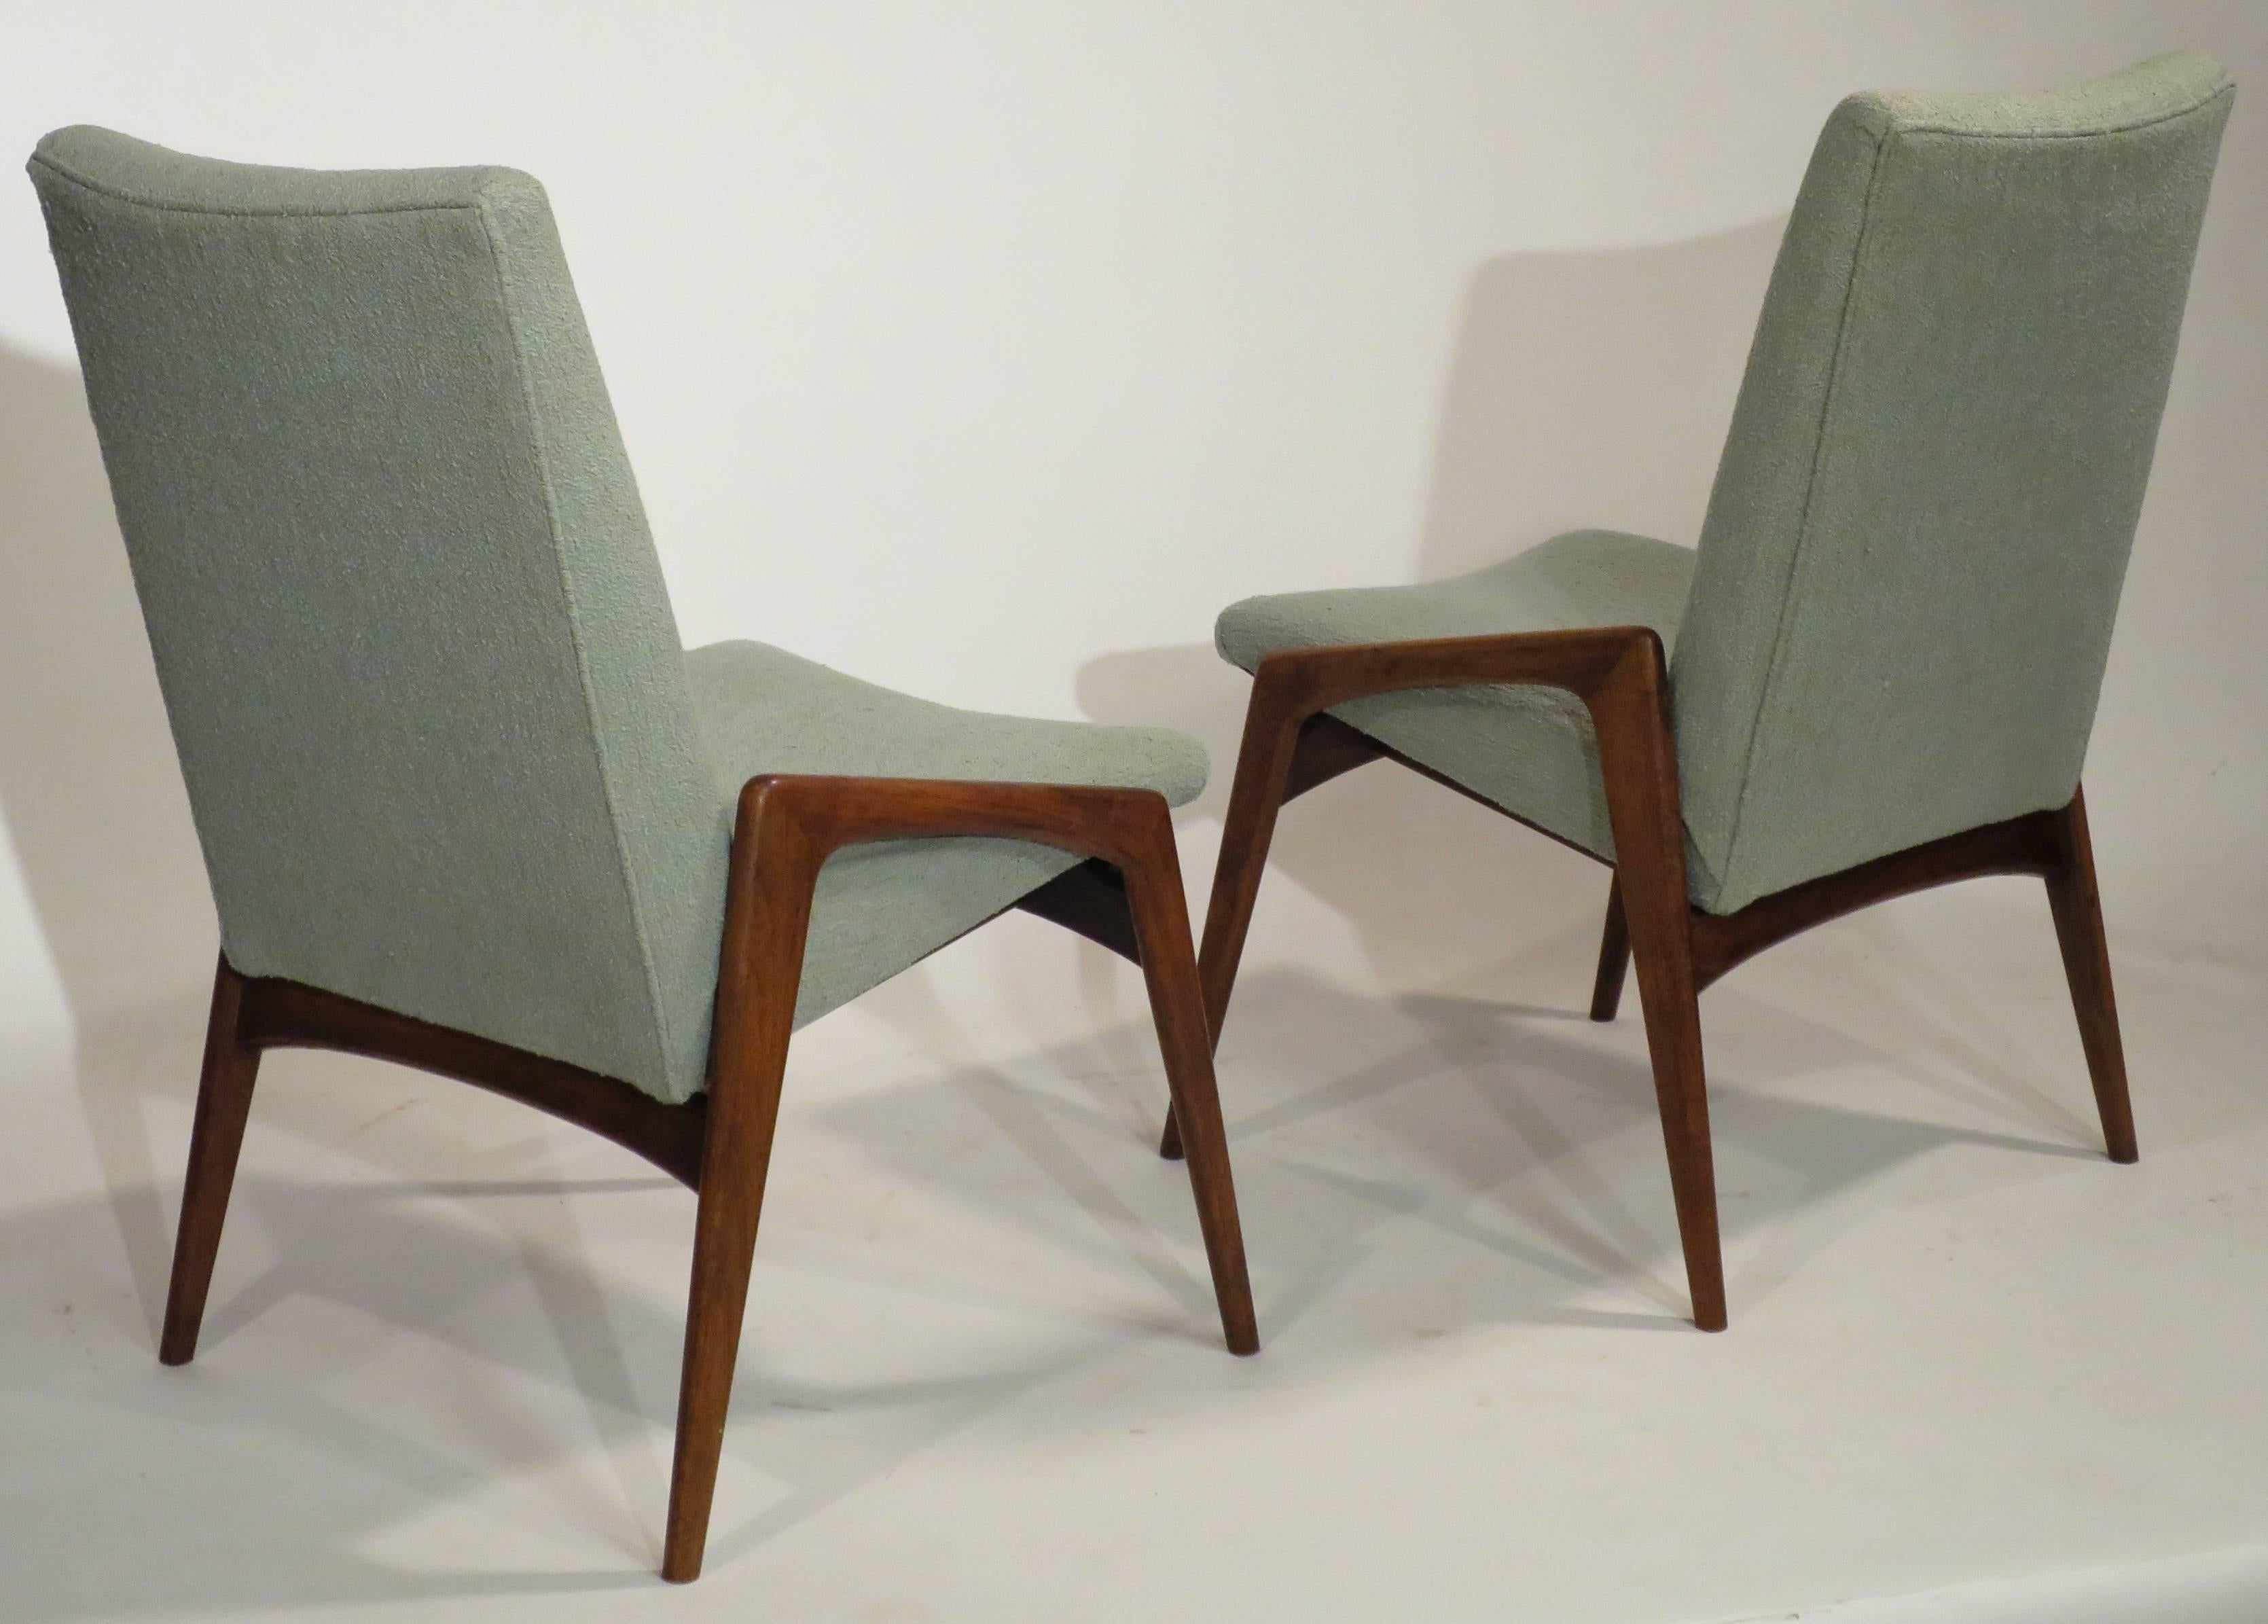 American Set of Four Mid-Century Dining Chairs